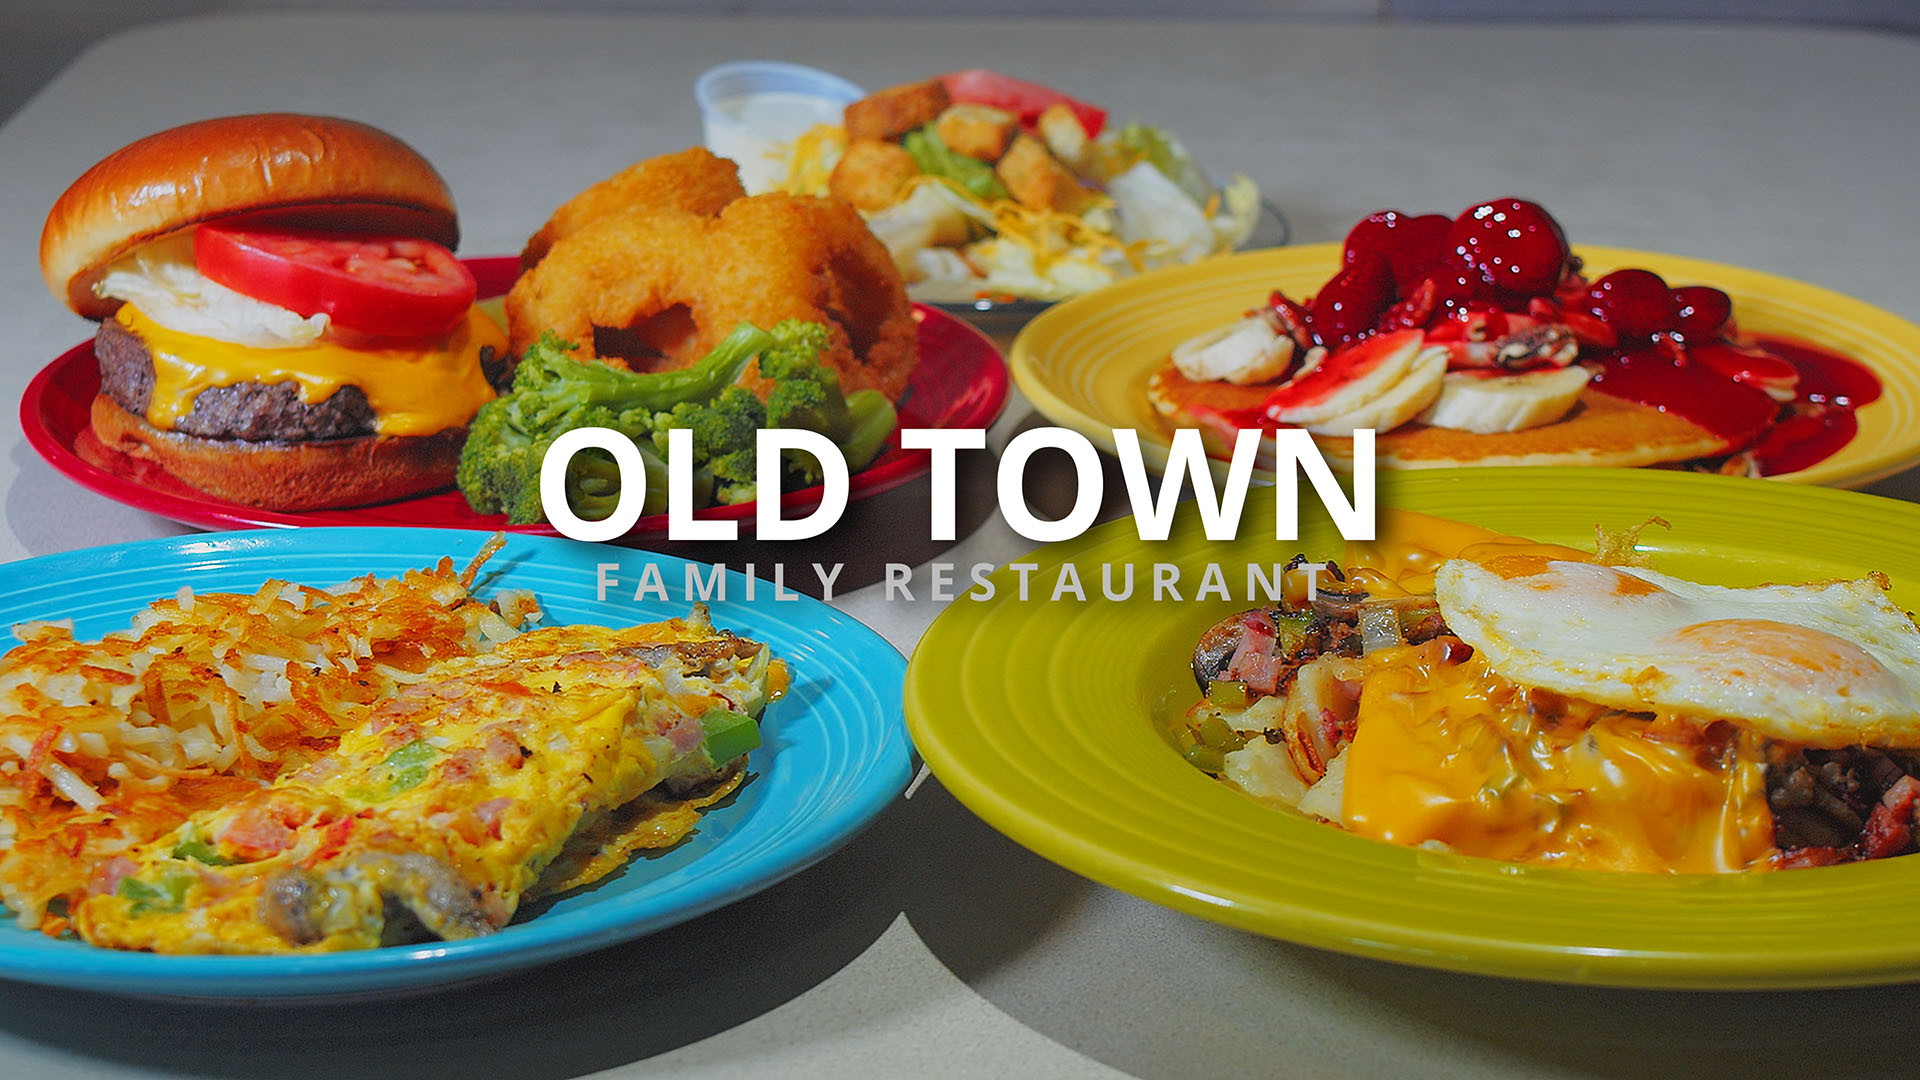 Old Town Family Restaurant – Clinton, IA – Commercial